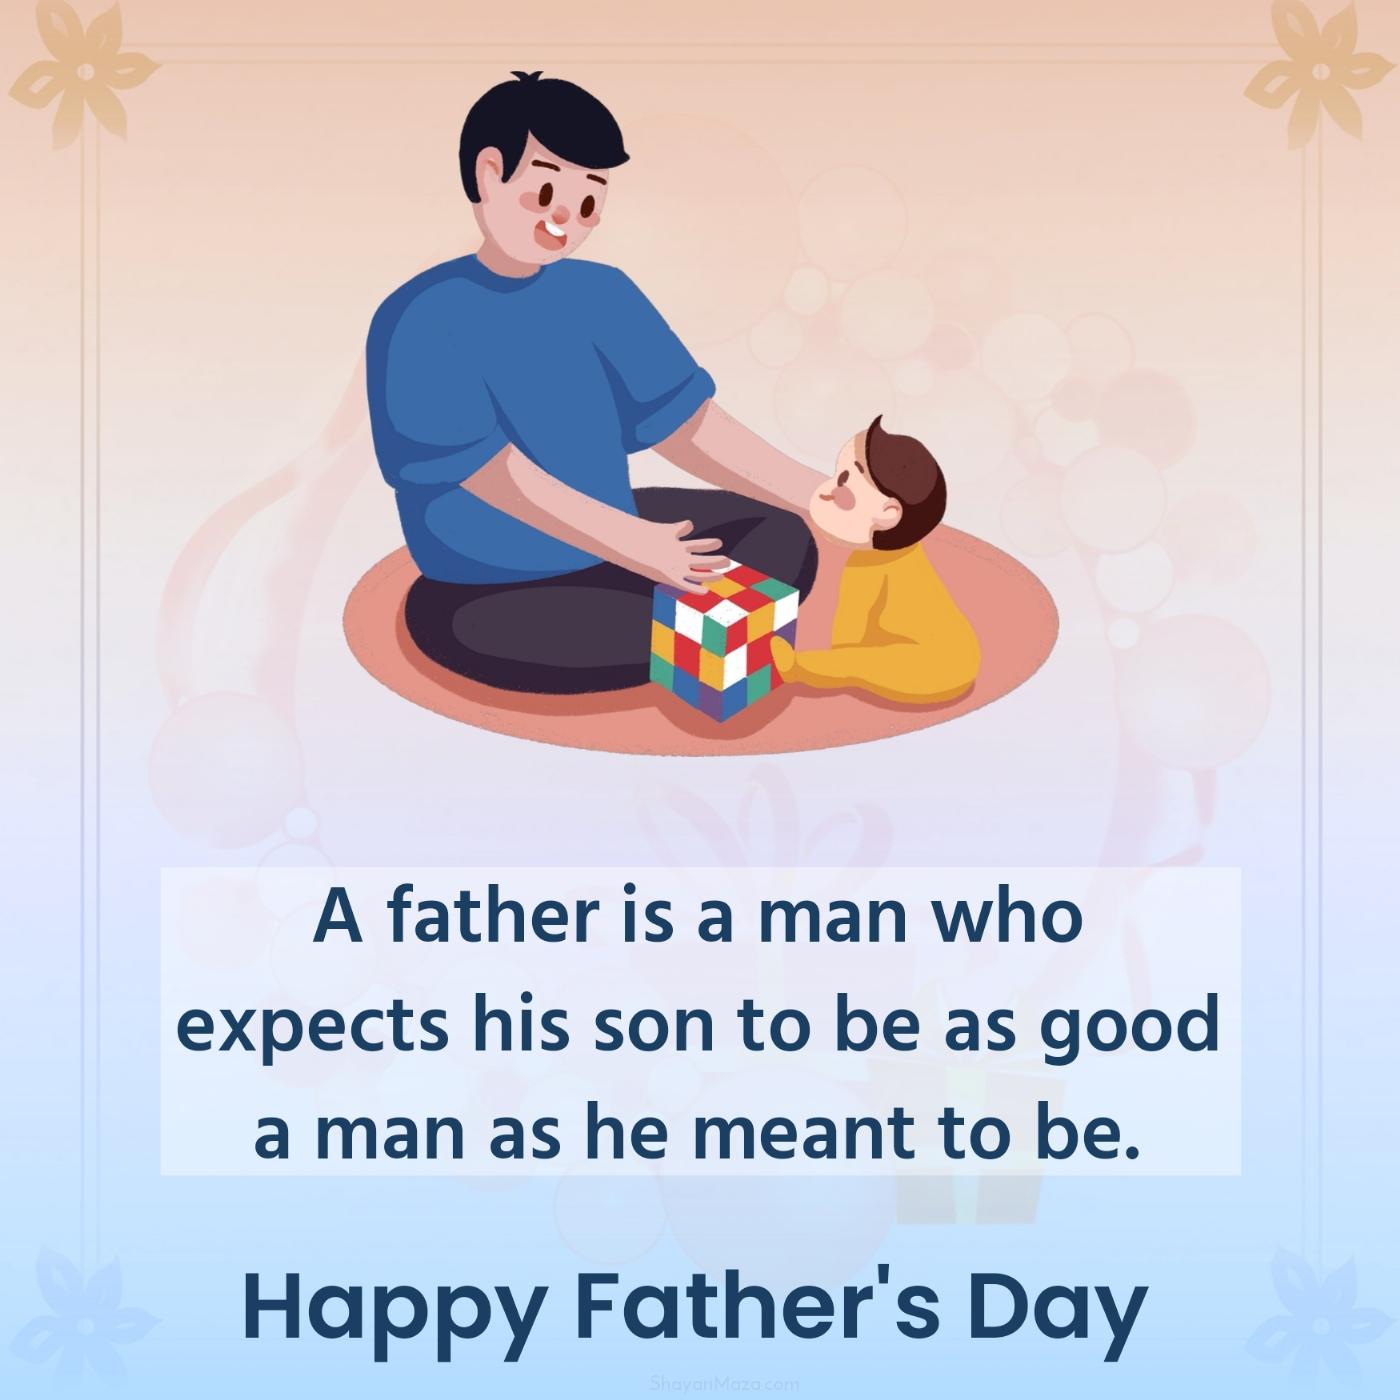 A father is a man who expects his son to be as good a man